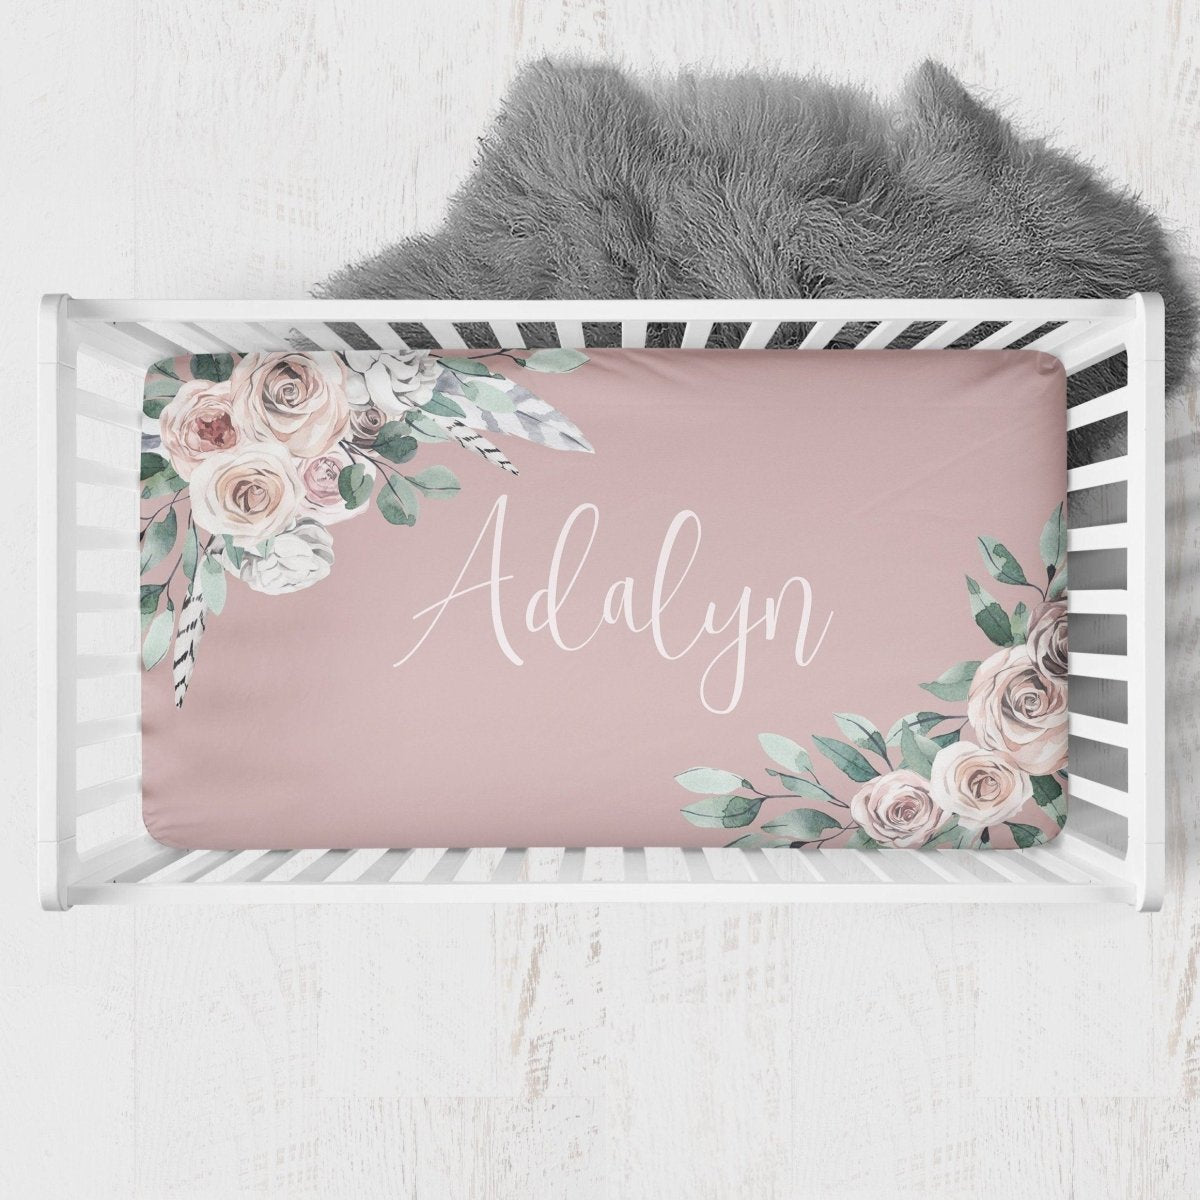 Boho Rose Personalized Crib Sheet - gender_girl, Personalized_Yes, text